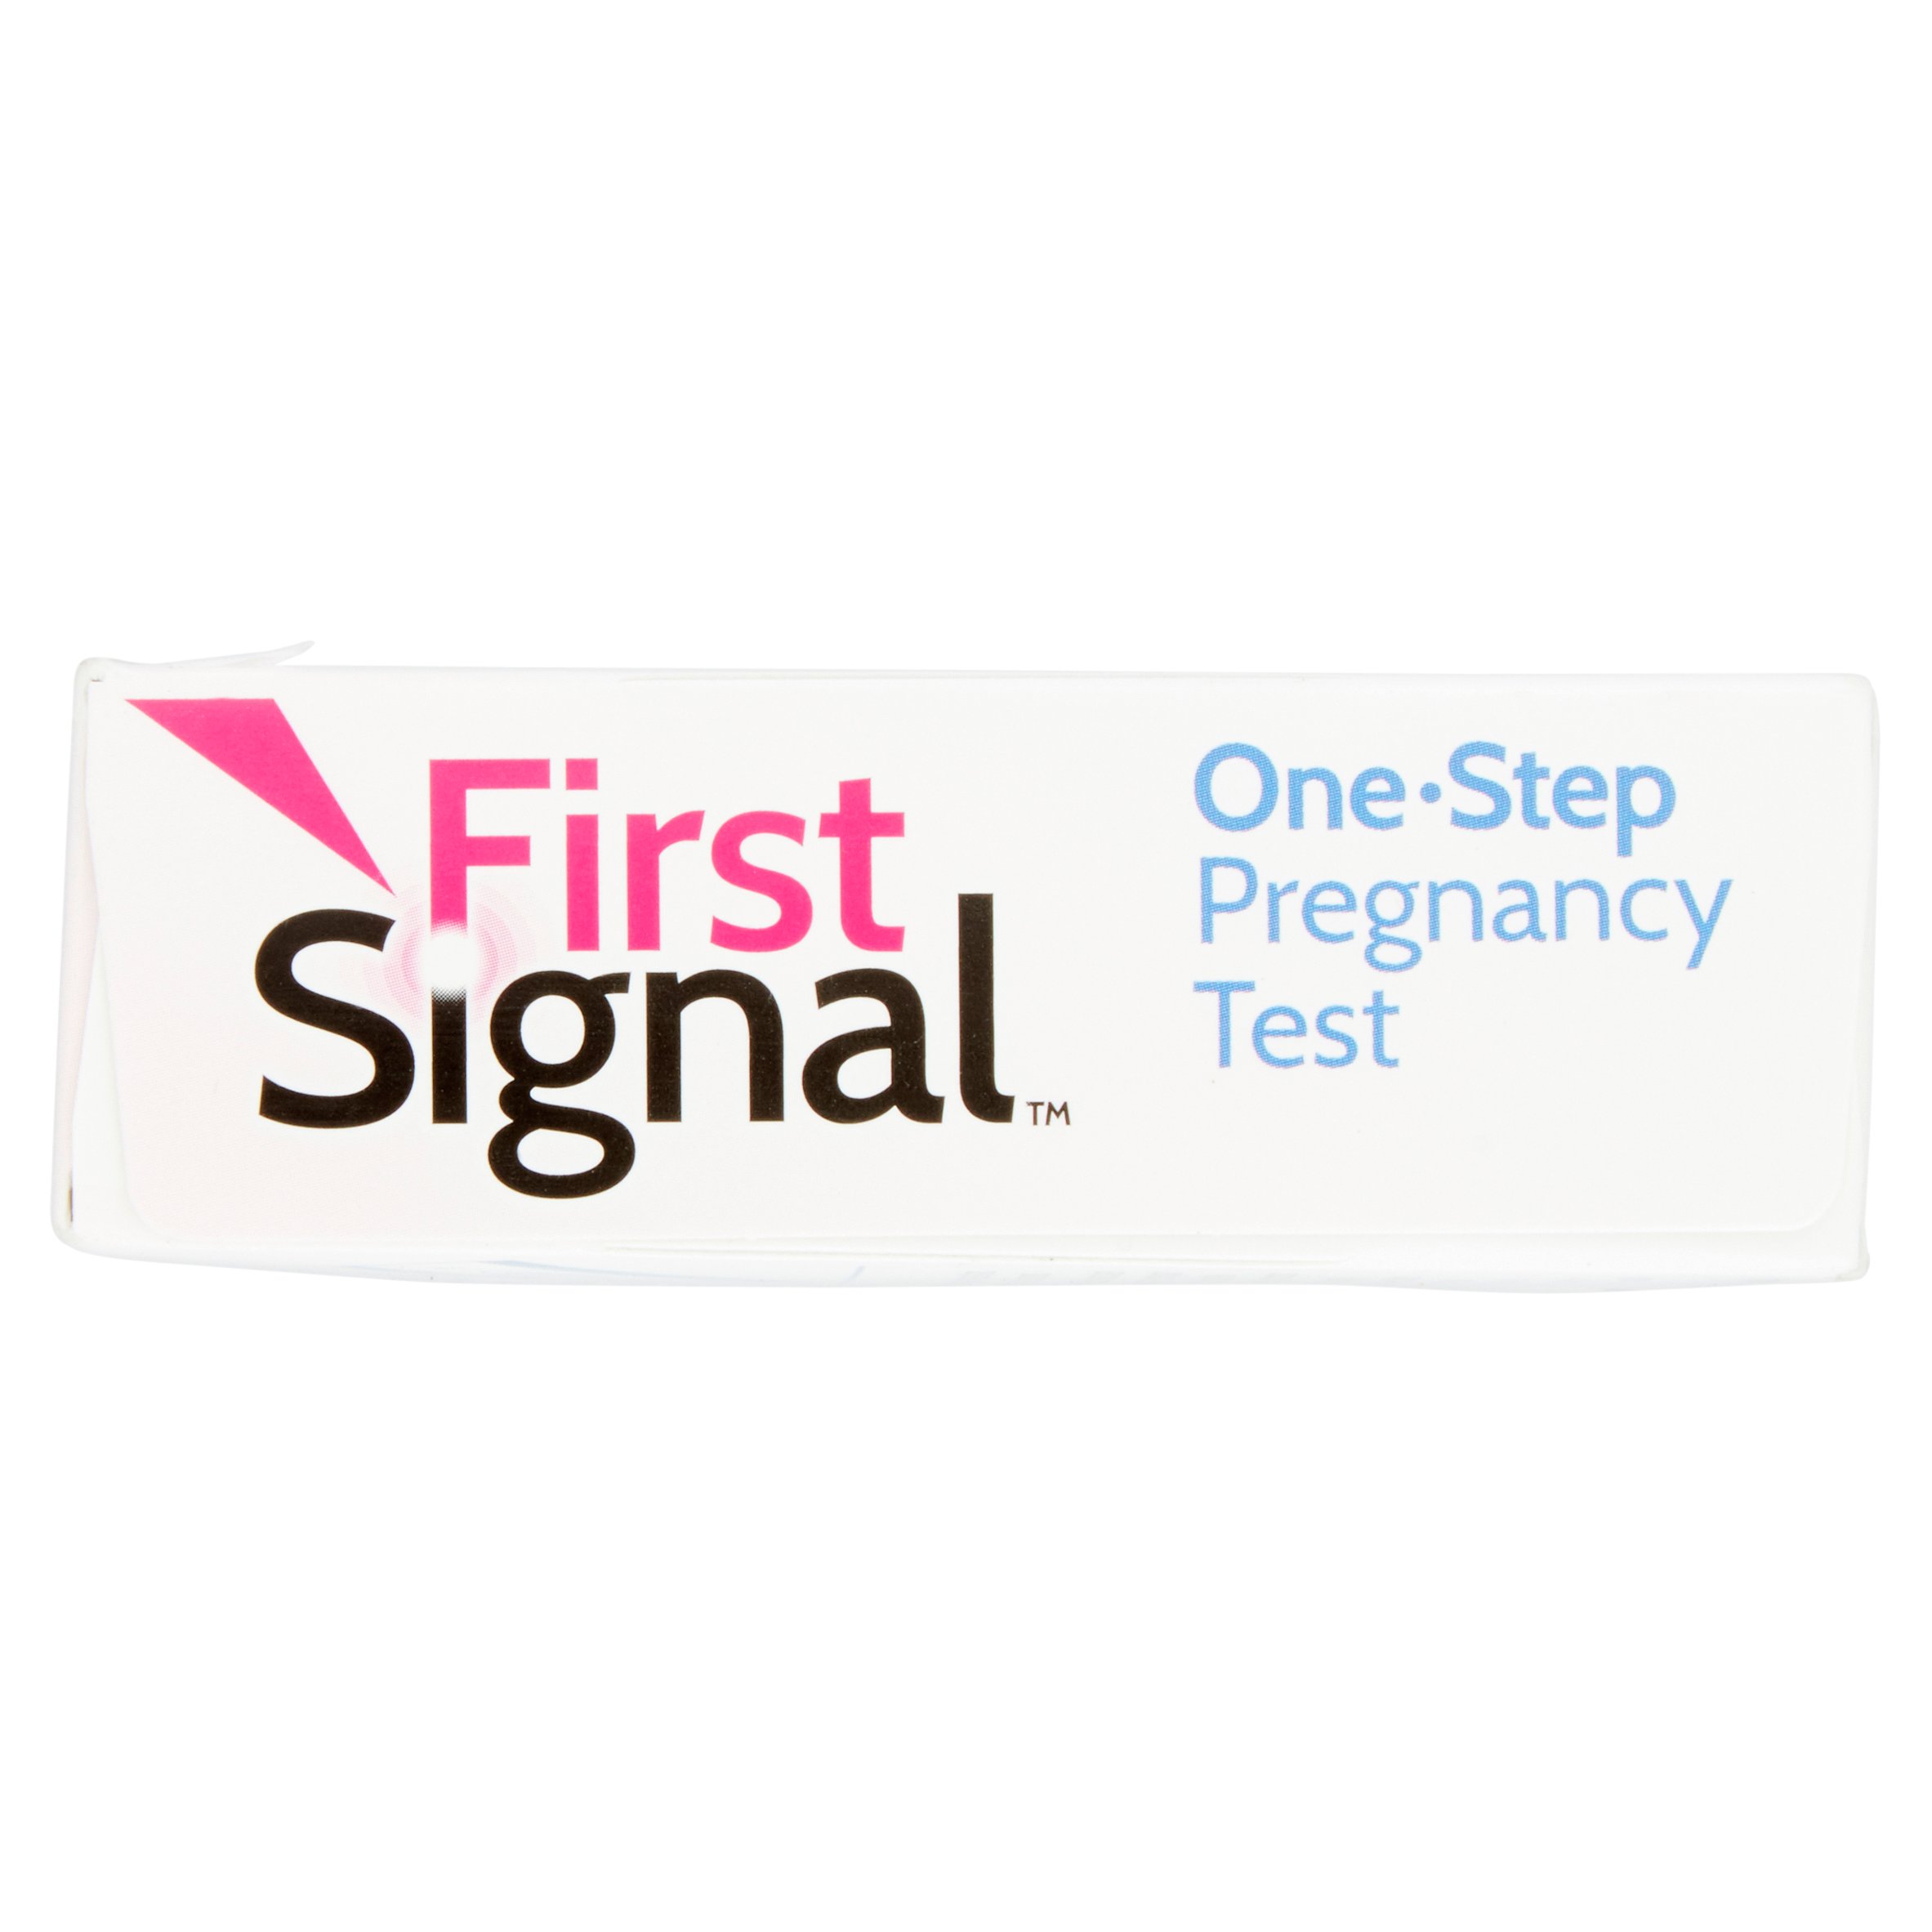 First Signal One-Step Pregnancy Test - image 3 of 5